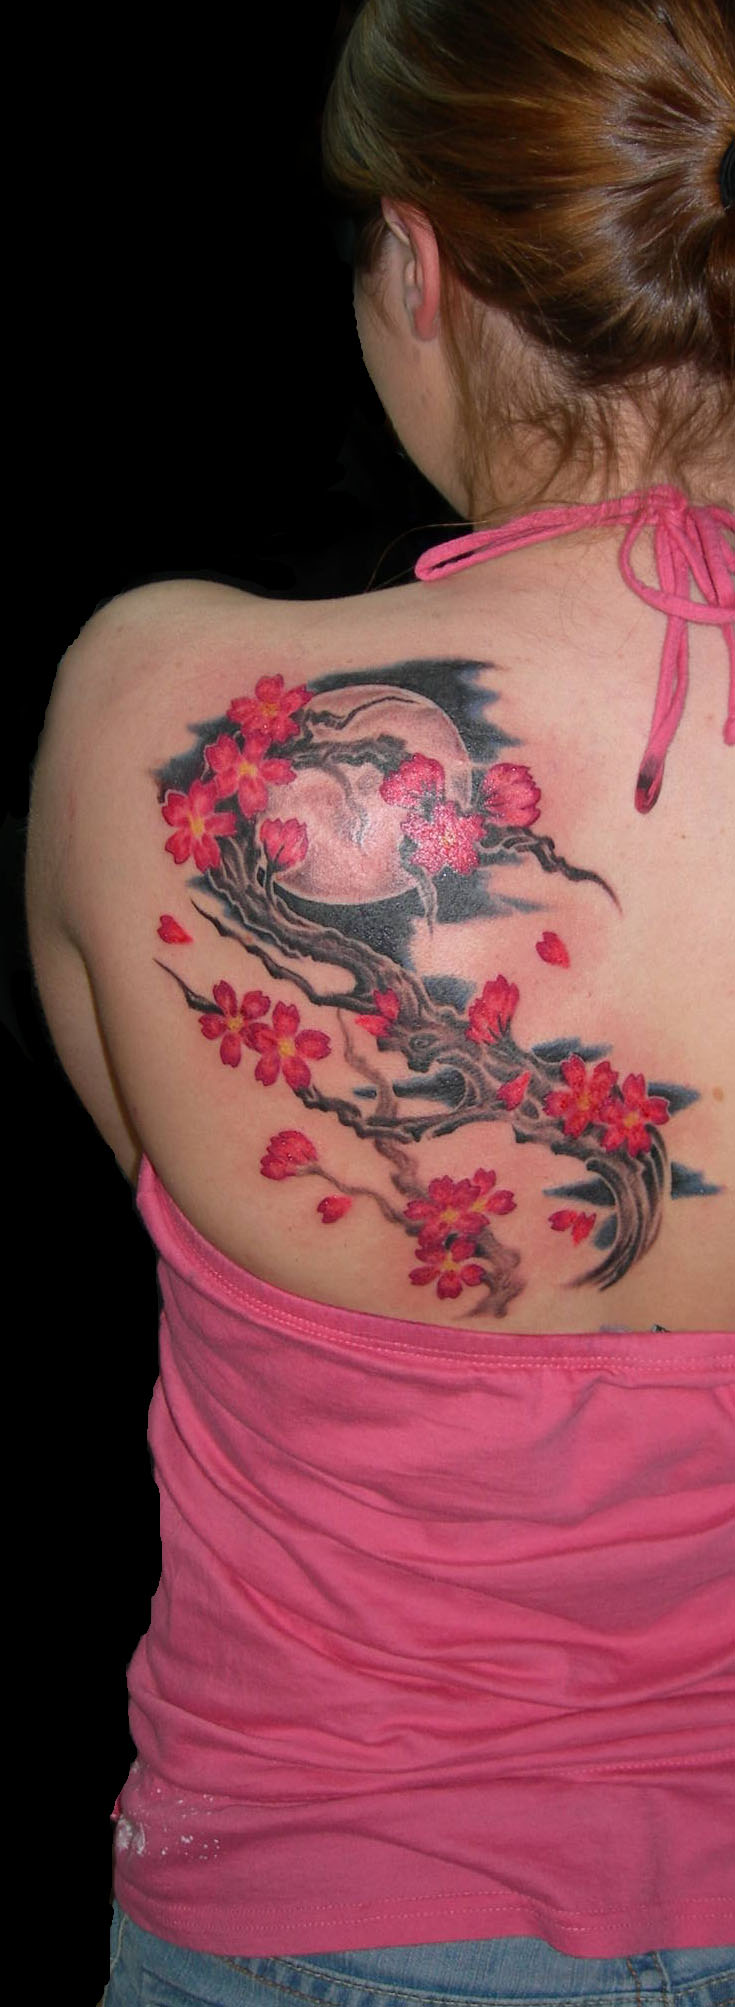 Full Moon and Cherry Blossom Tattoo On Left Back Shoulder